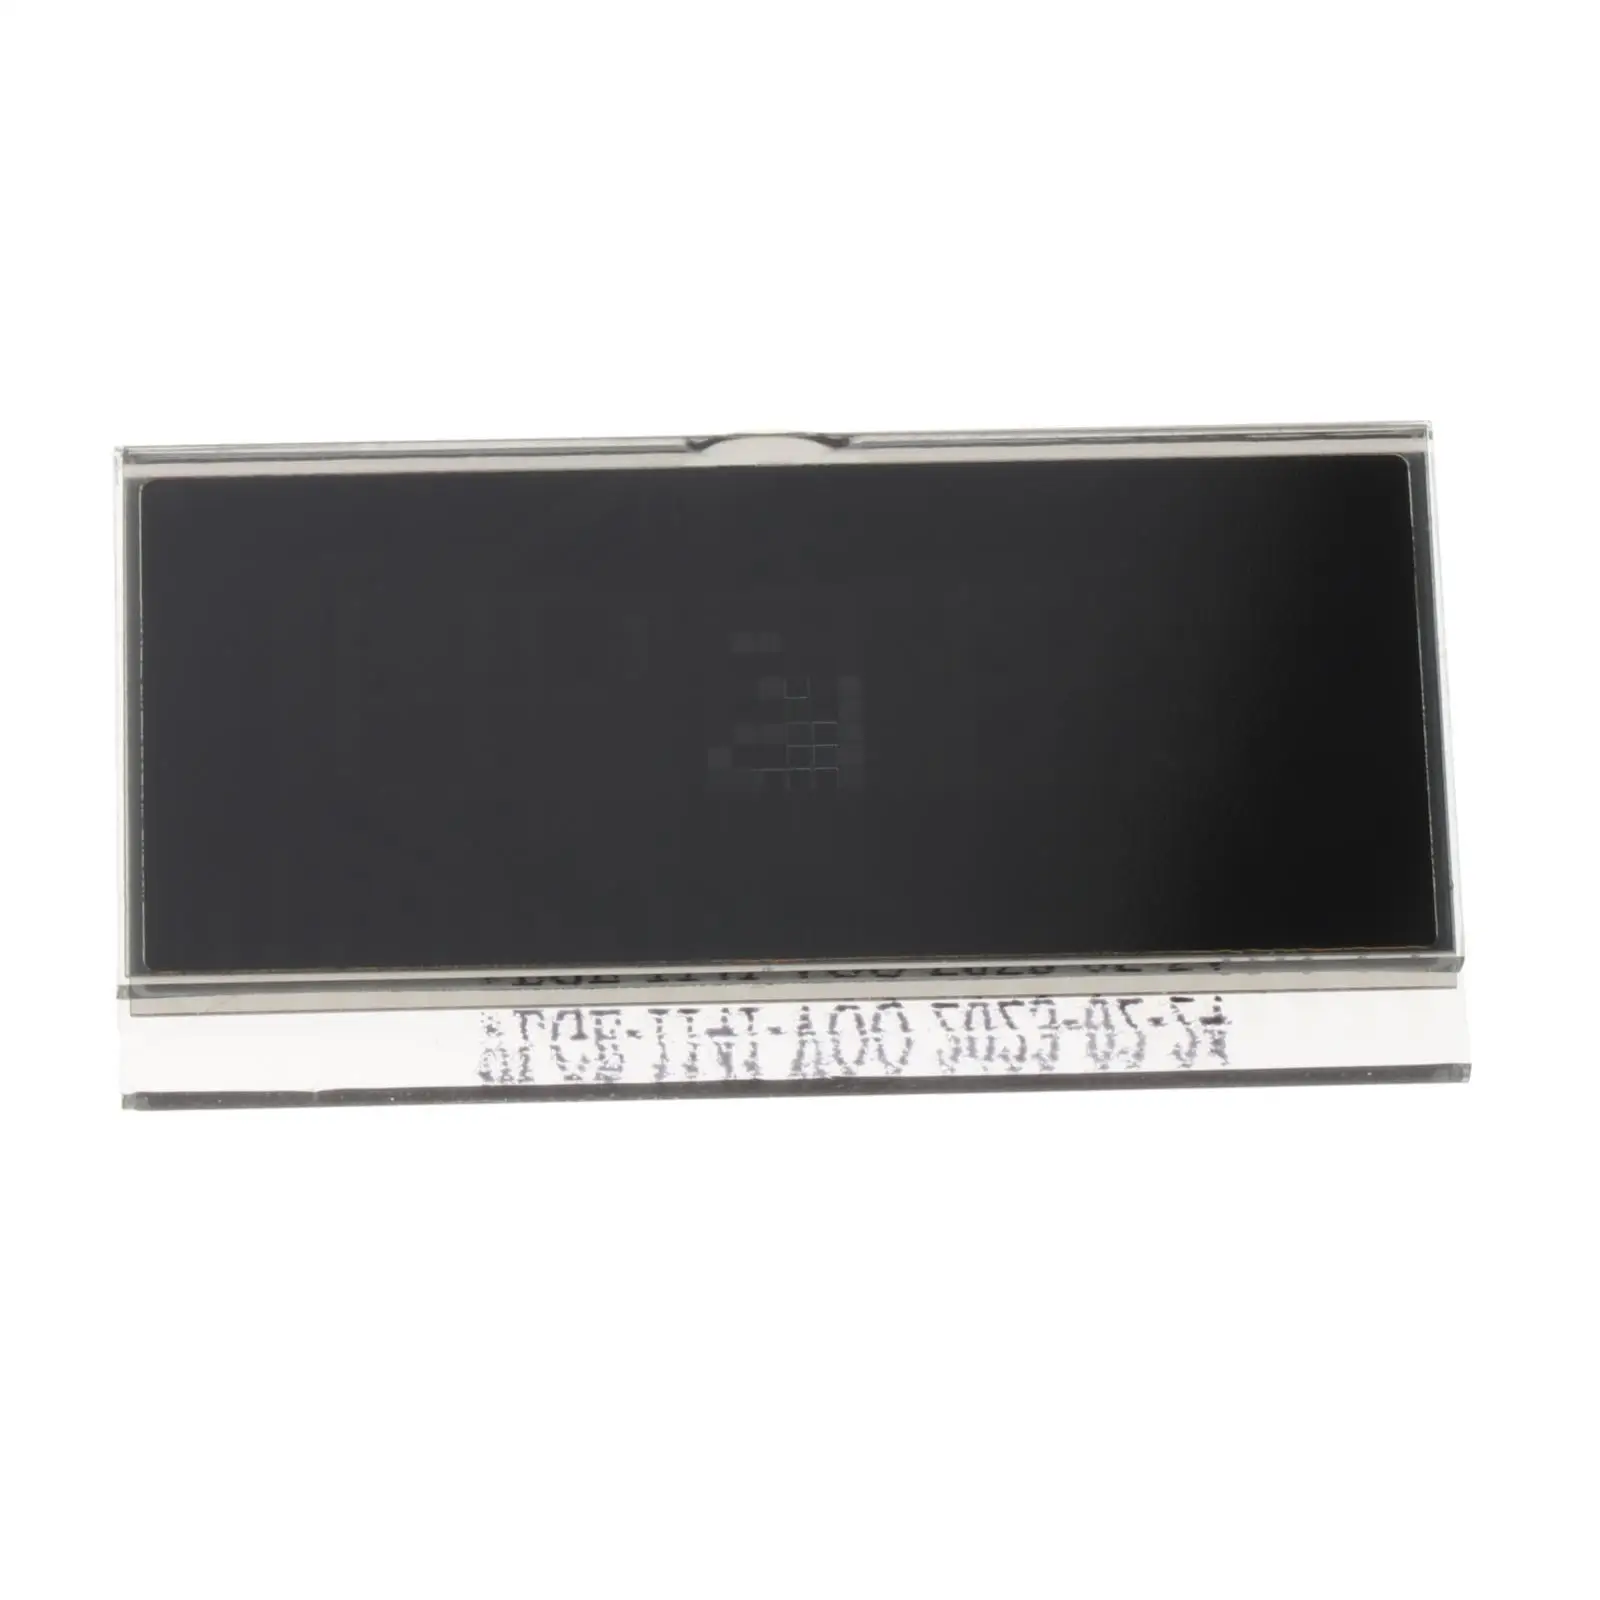 LCD Display Screen Air Conditioning Pixel Repair Replace High Performance for Audi A6 4F Q7 4L 2005-2012 Accessory